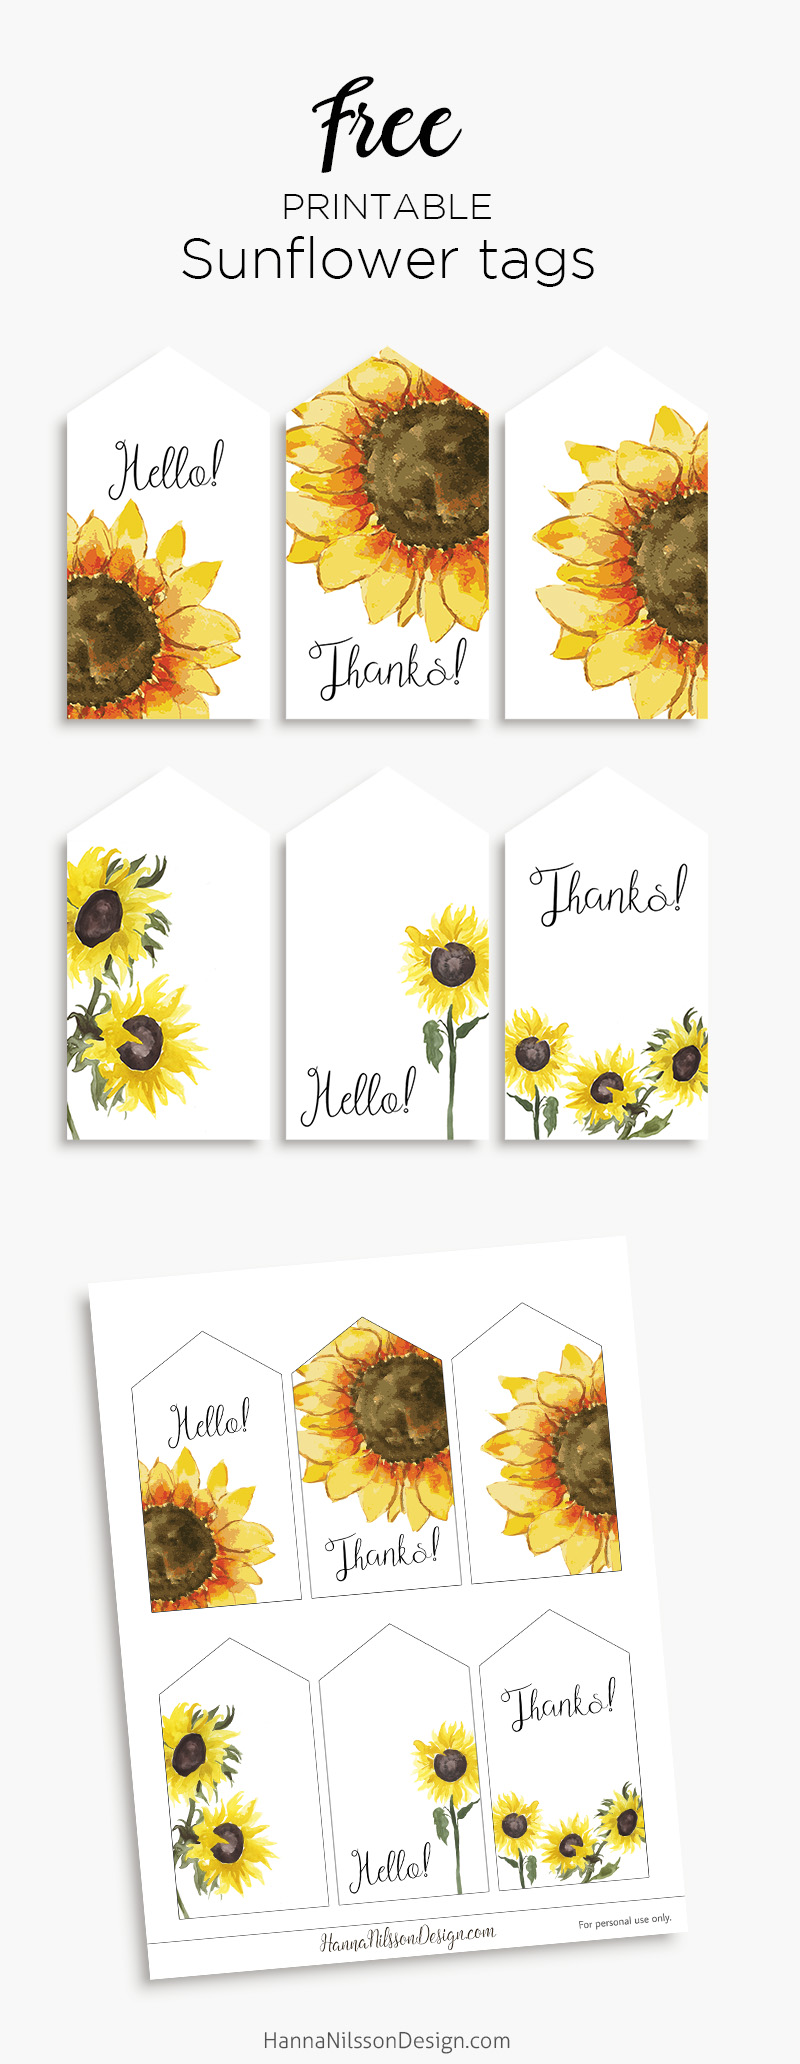 sunflower-tags-late-summer-gift-tags-hanna-nilsson-design